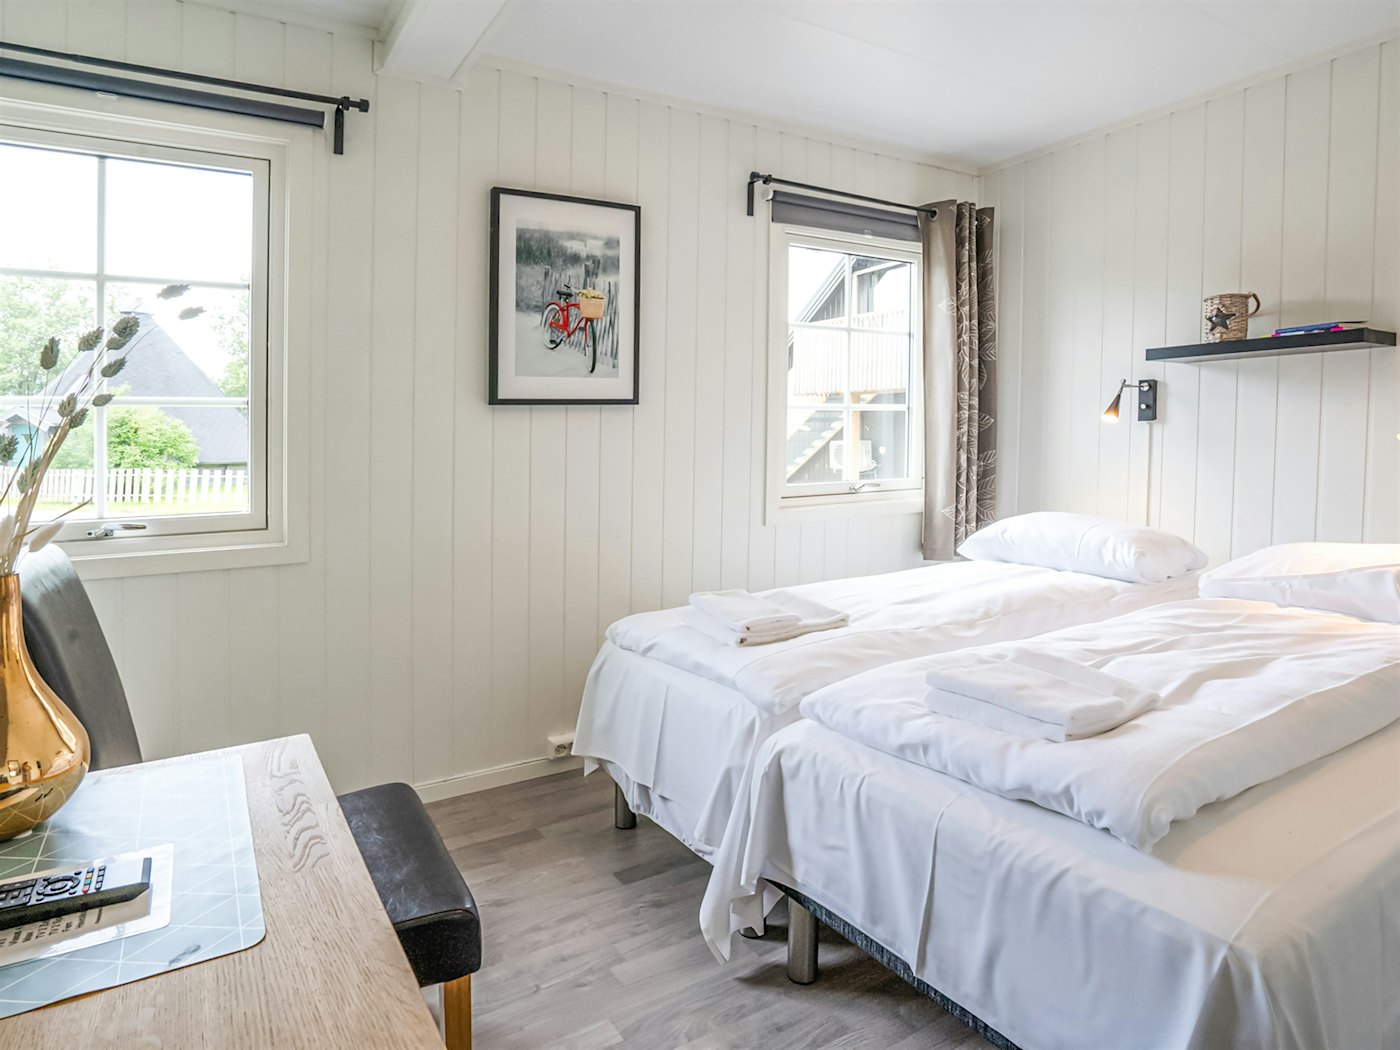 Bright room with a double bed with white bed linen, the room is decorated with a picture on the wall and a vase. Photo